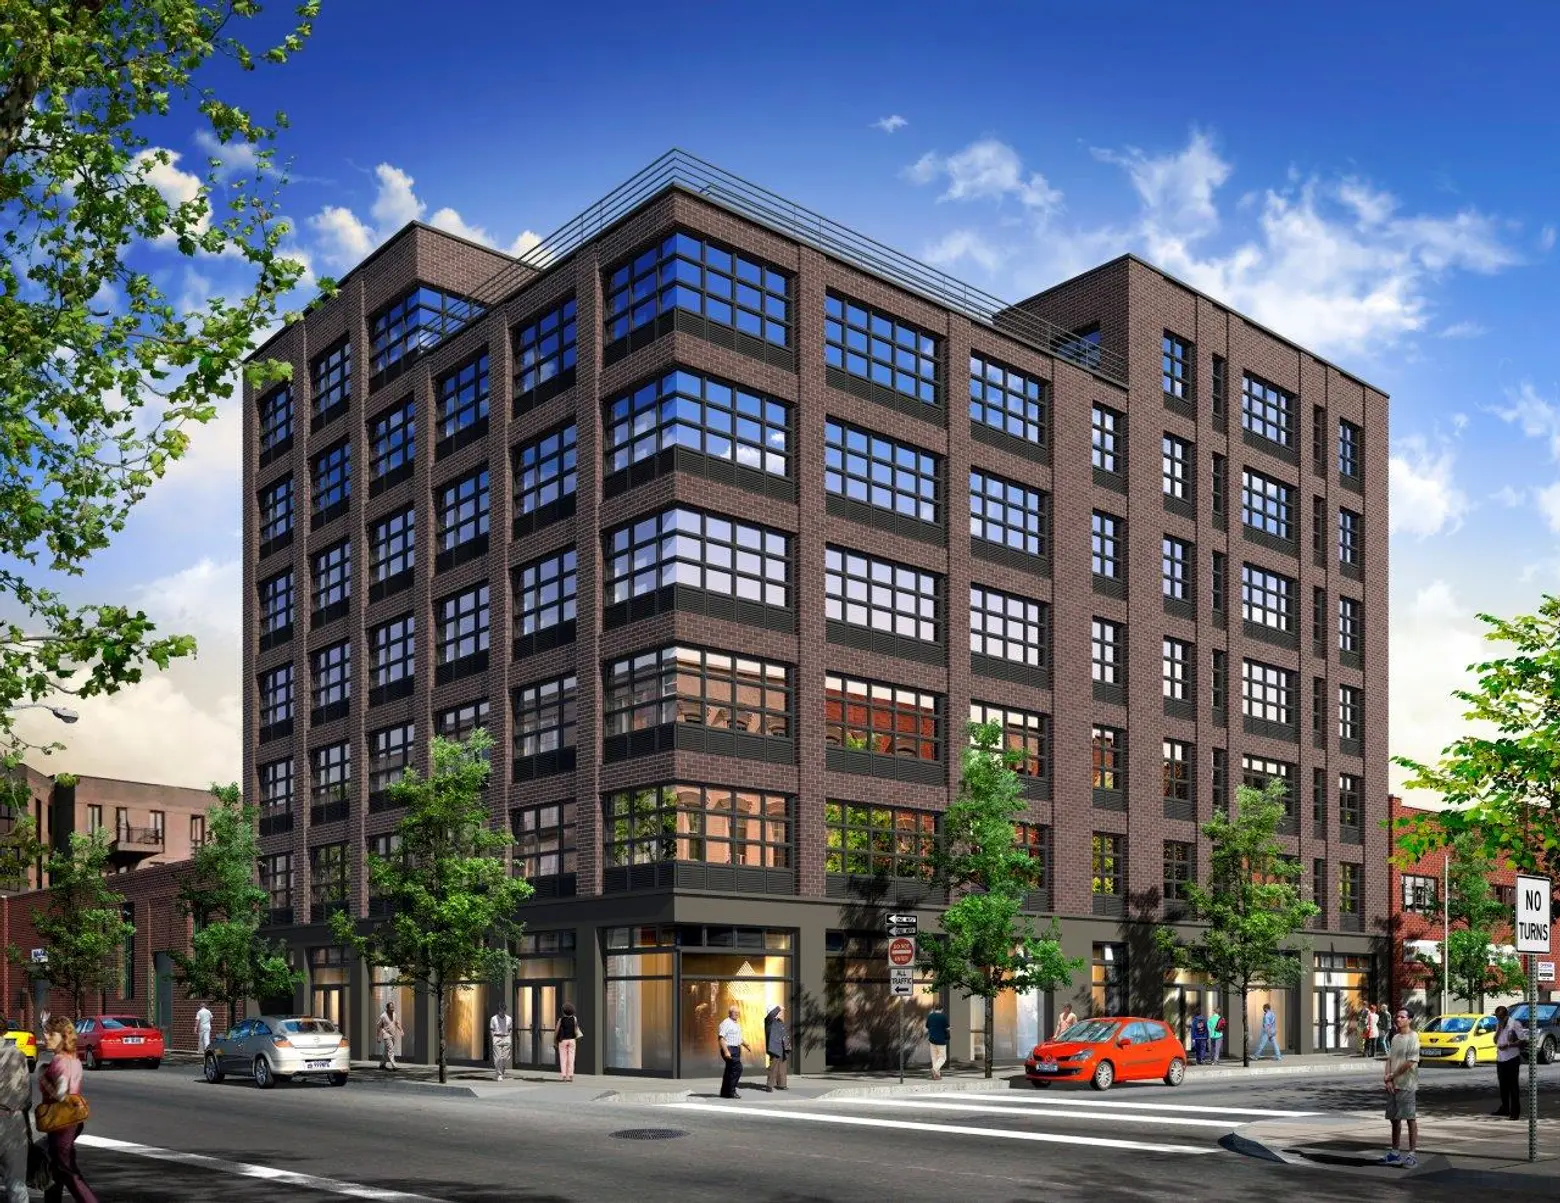 REVEALED: New East Williamsburg Rental 66 Ainslie Street Aims for Ubiquitous Factory Look